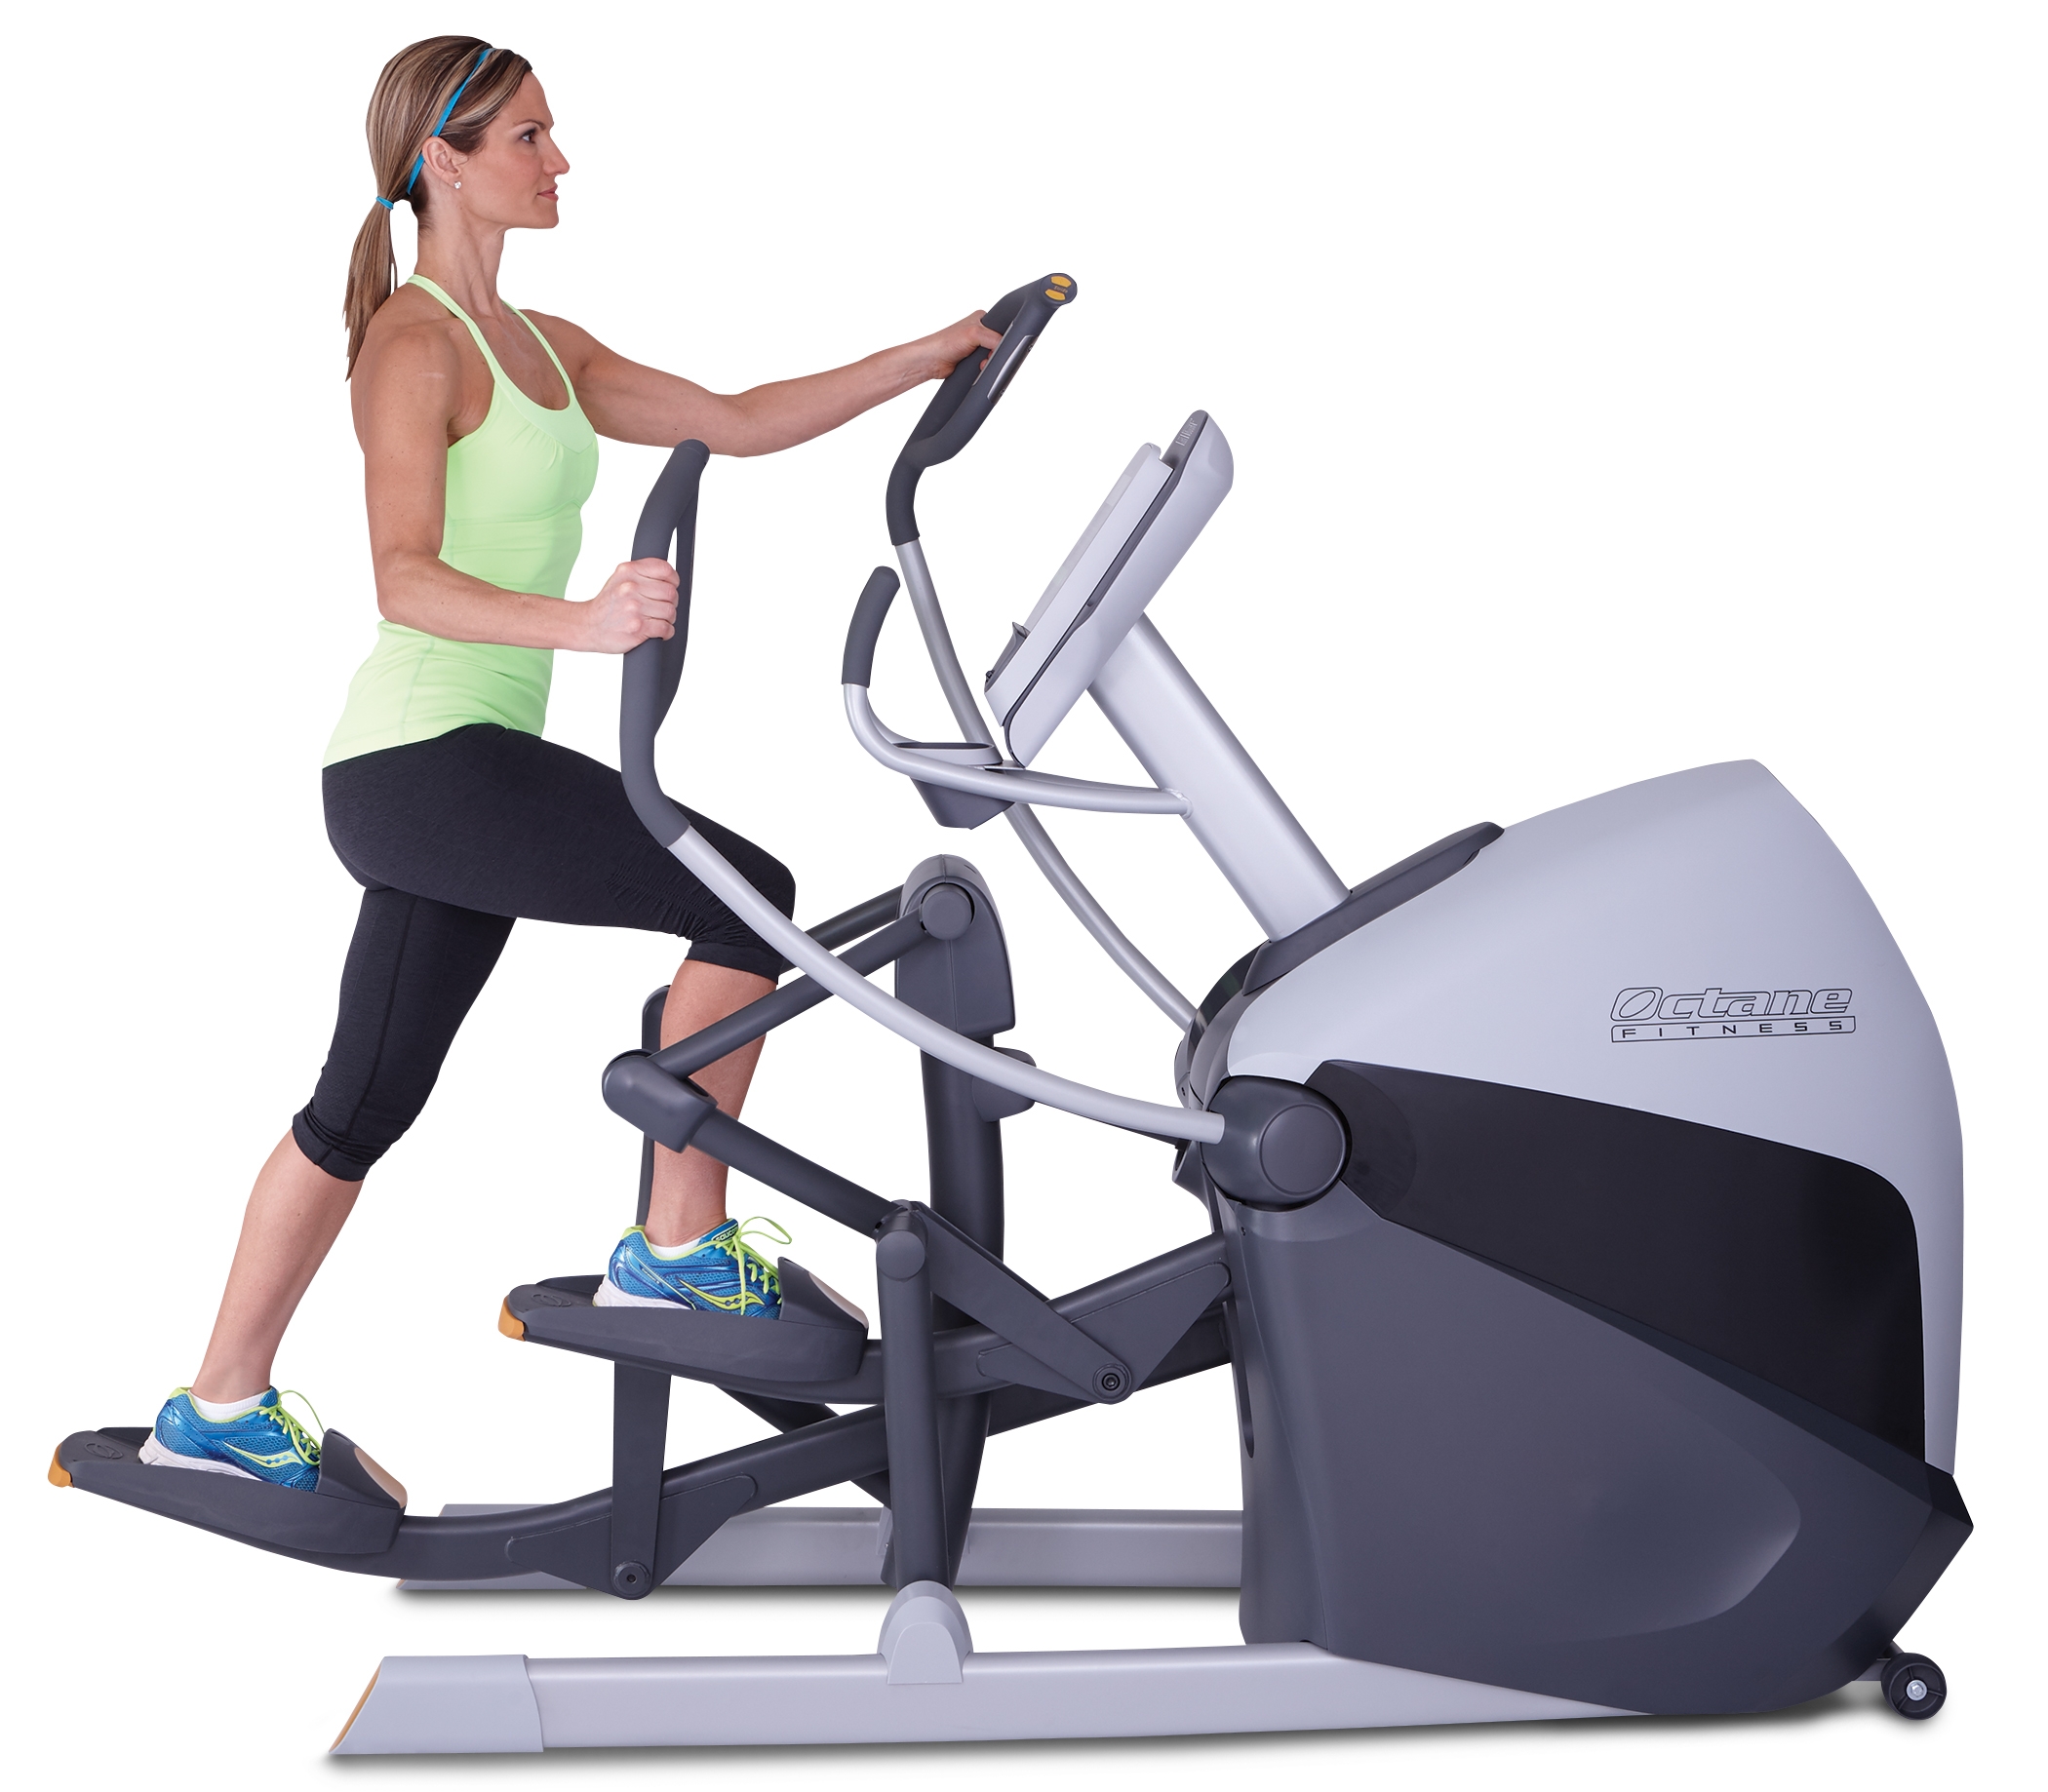 New XT-Oneâ„¢ Cross-Trainer from Octane Fitness Does it All With ...